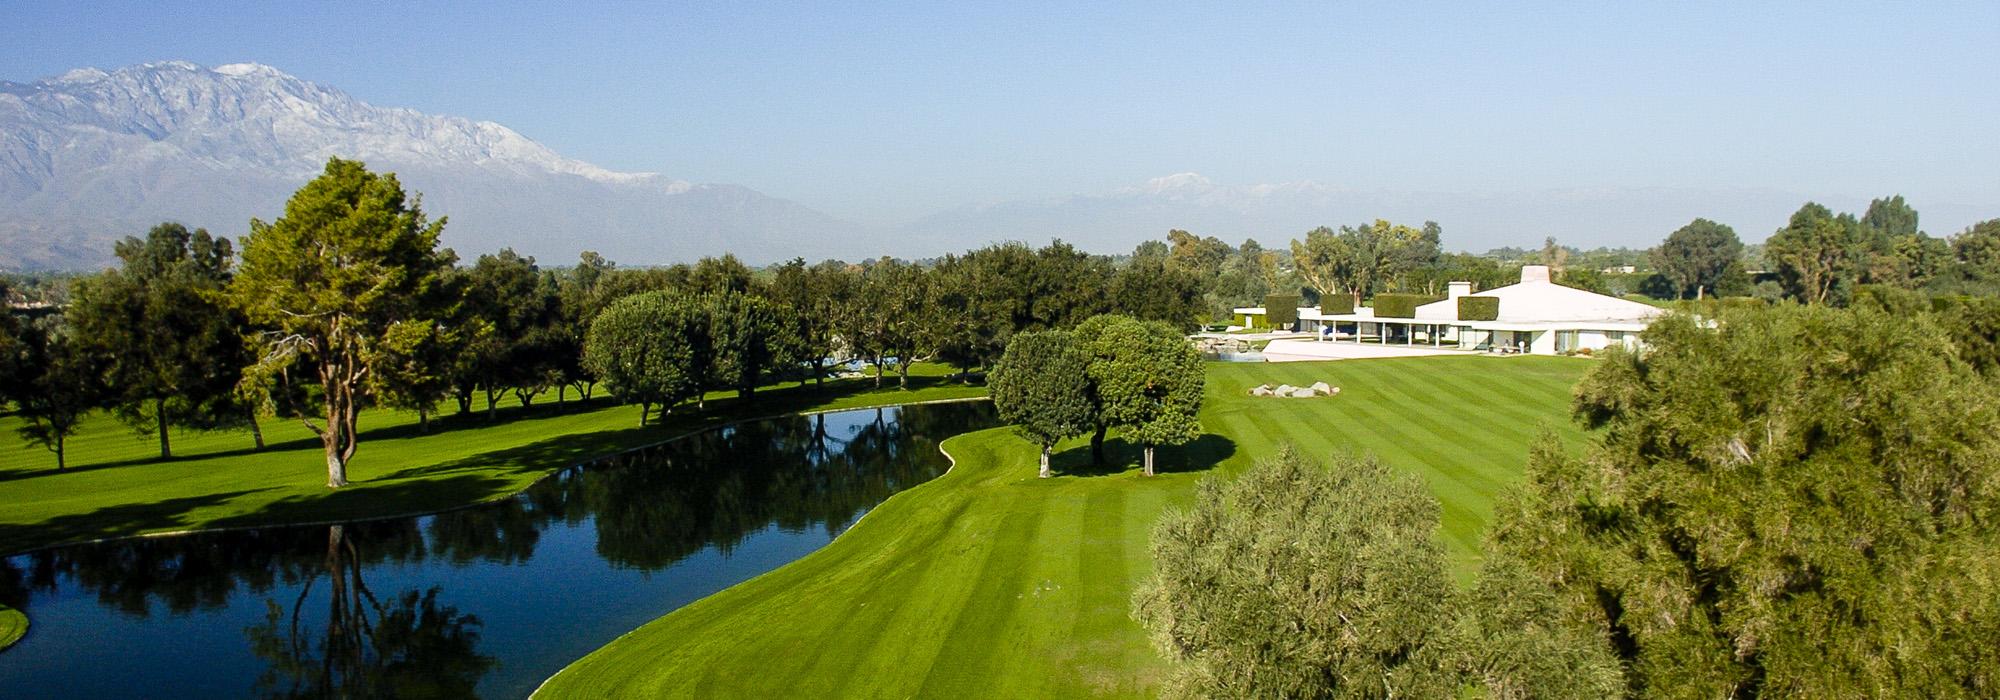 The Annenberg Retreat at Sunnylands Golf Course, Rancho Mirage, CA